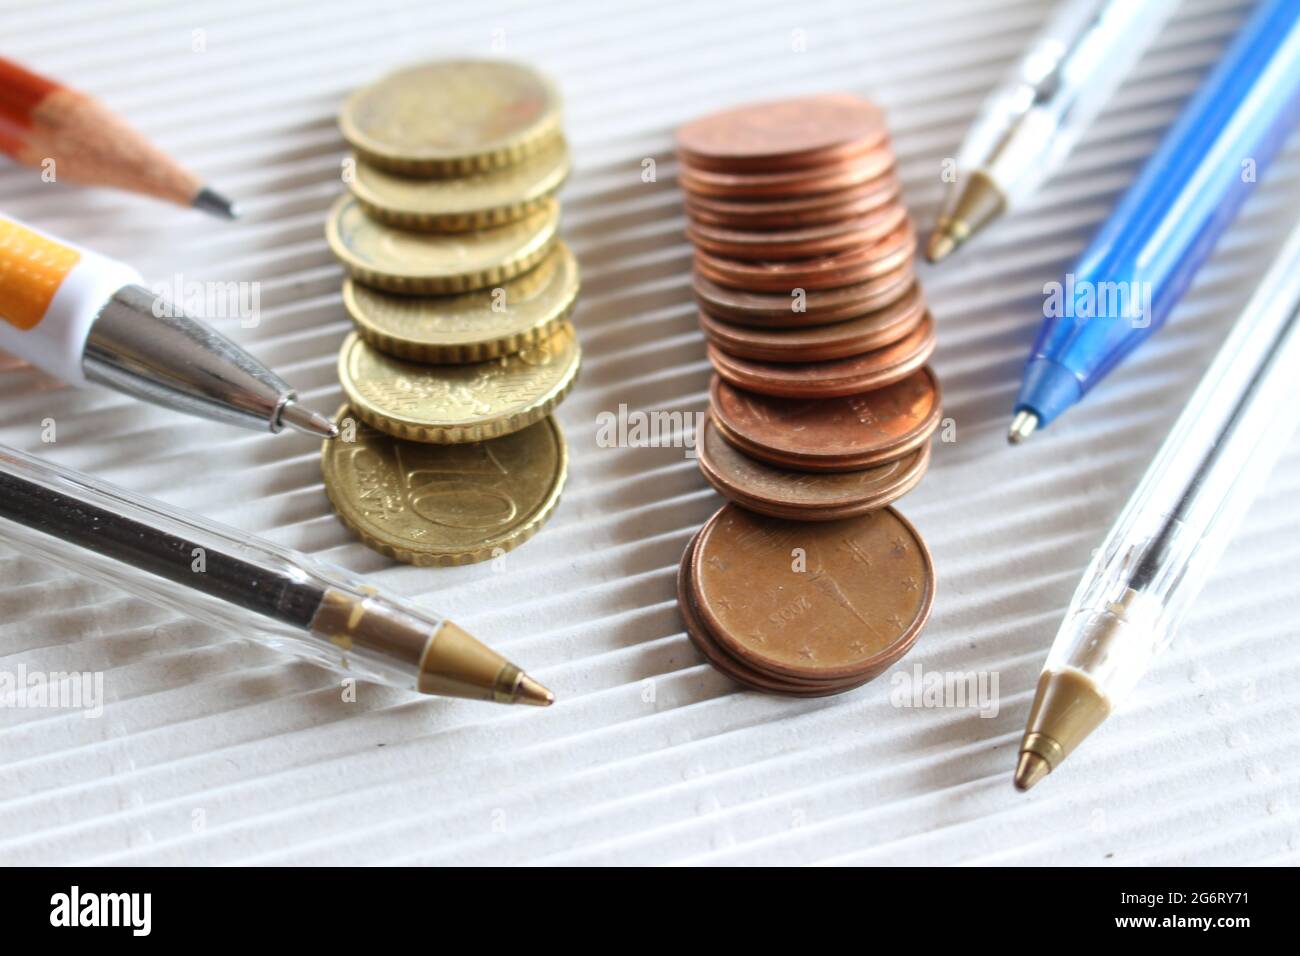 Assembly approves the financial statements. Above detail business view, pen, euro coins, on office desk, finance concept. Stock Photo